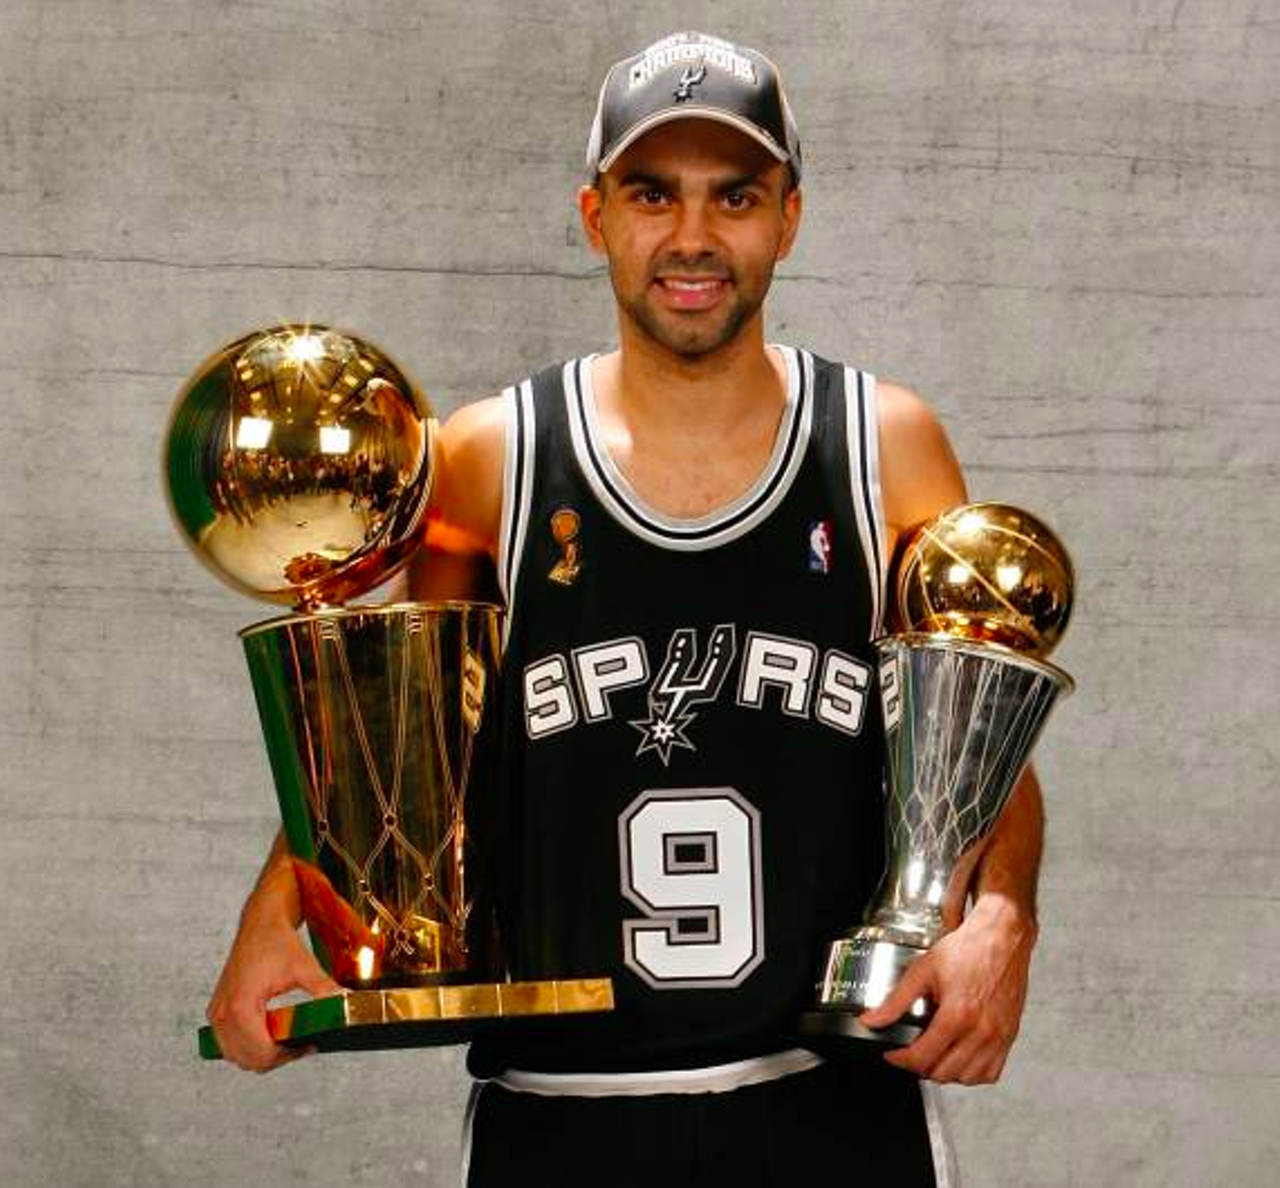 He completely earned the Finals MVP award in 2007.
On top of winning his third championship with the Spurs, Tony had a lot to celebrate in 2007 as he was the Finals MVP at age 25. While he had been with the team for a few seasons, this was when he really came into his element and showed the basketball world just how badass he was. With the feat he also became the first international player to win the award.
Photo by Nathaniel S. Butler/Getty Images